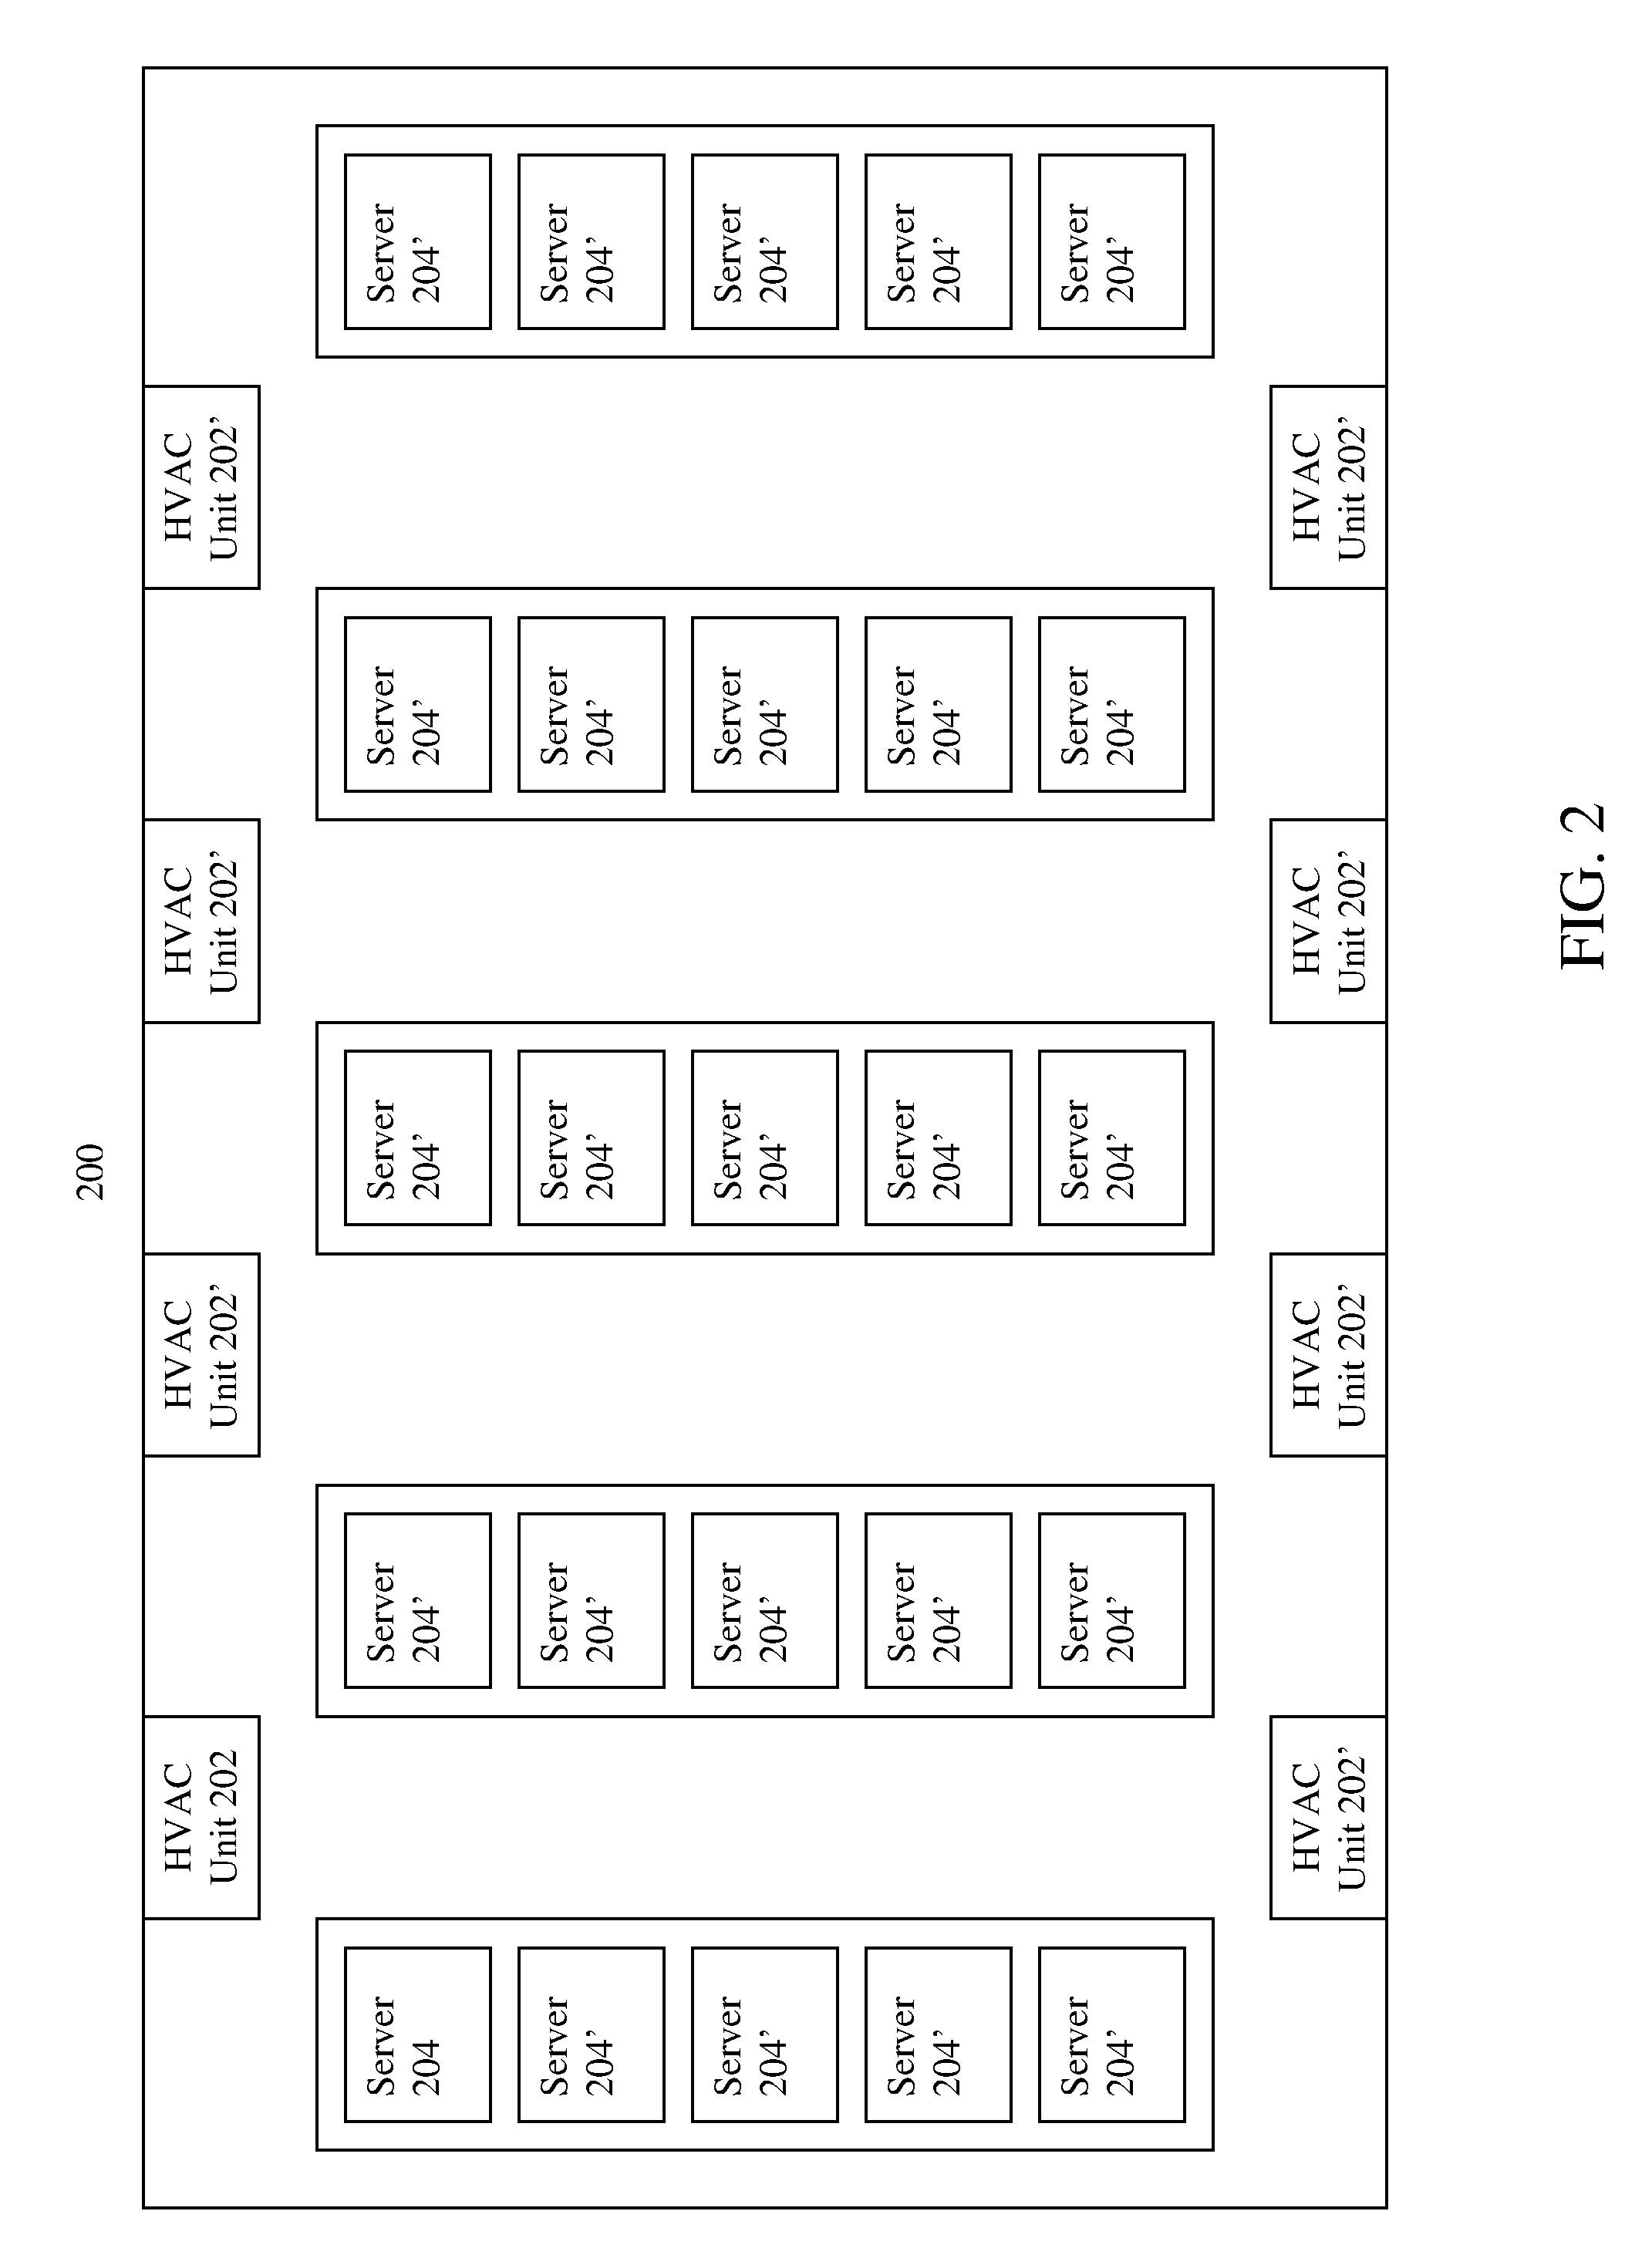 Heating, Ventilation, and Air Conditioning Management System and Method